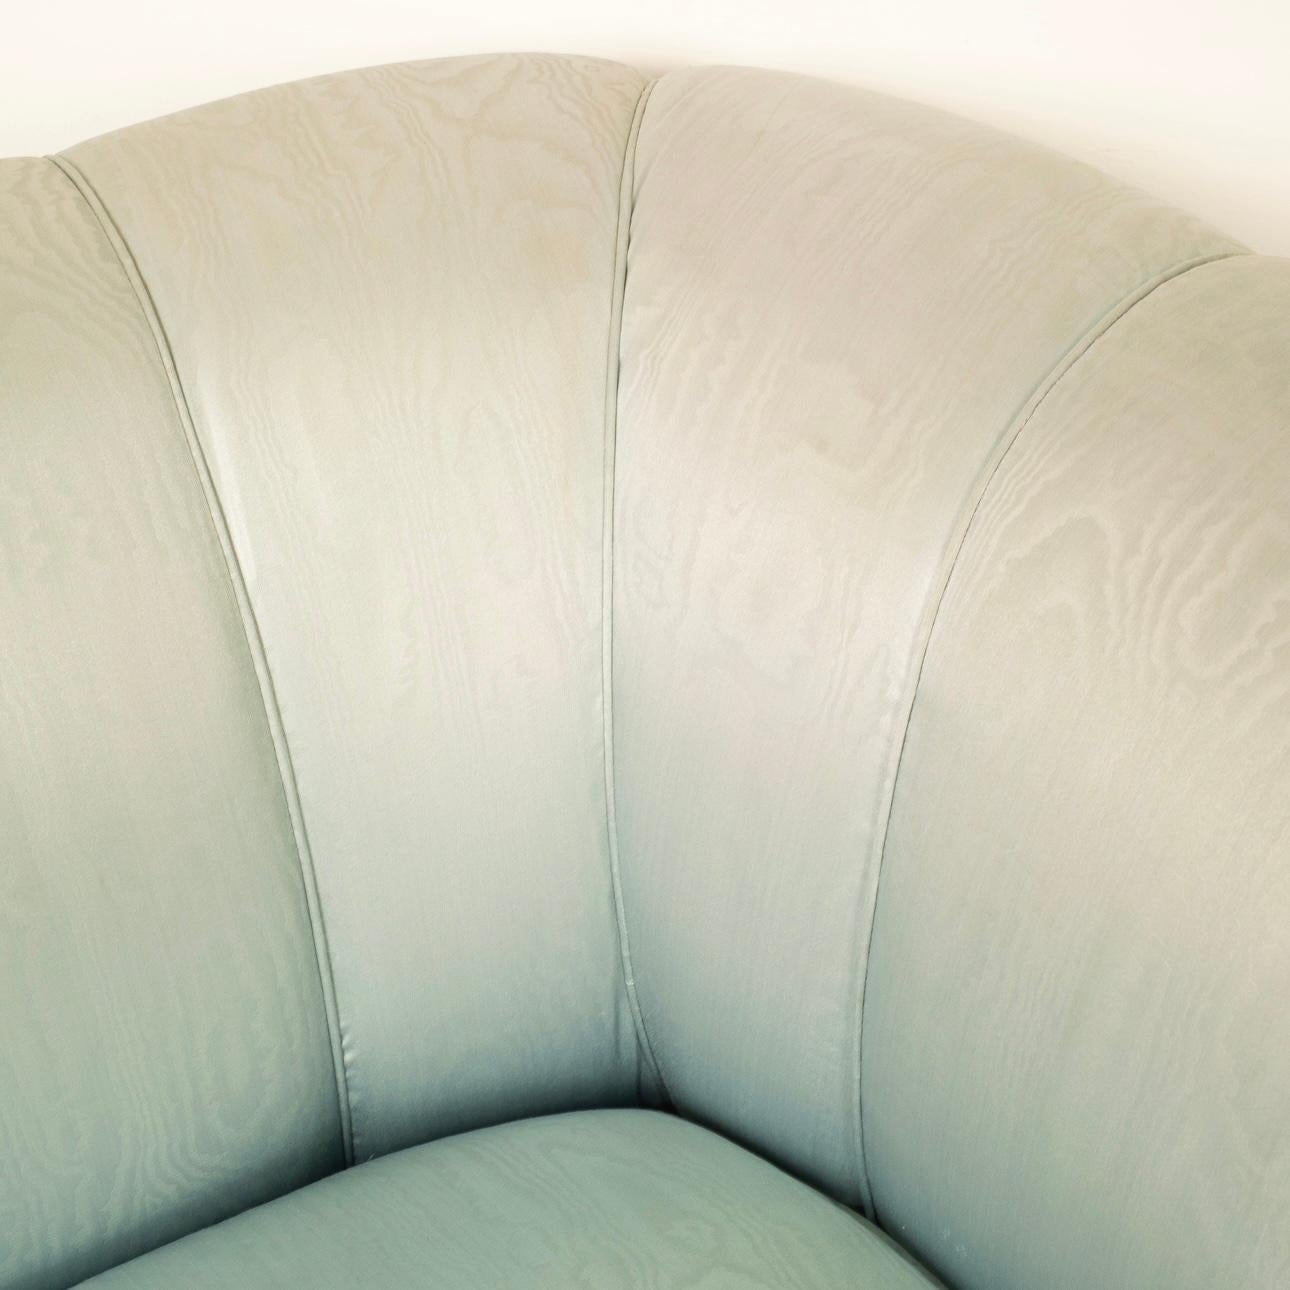 Discover the unique beauty of a pair of vintage sofas designed by architect Fabrizio Smania for Smania Studio Interni in the early 1980s. These sofas are distinguished by their extraordinary iridescent blue moiré silk upholstery, which is still in